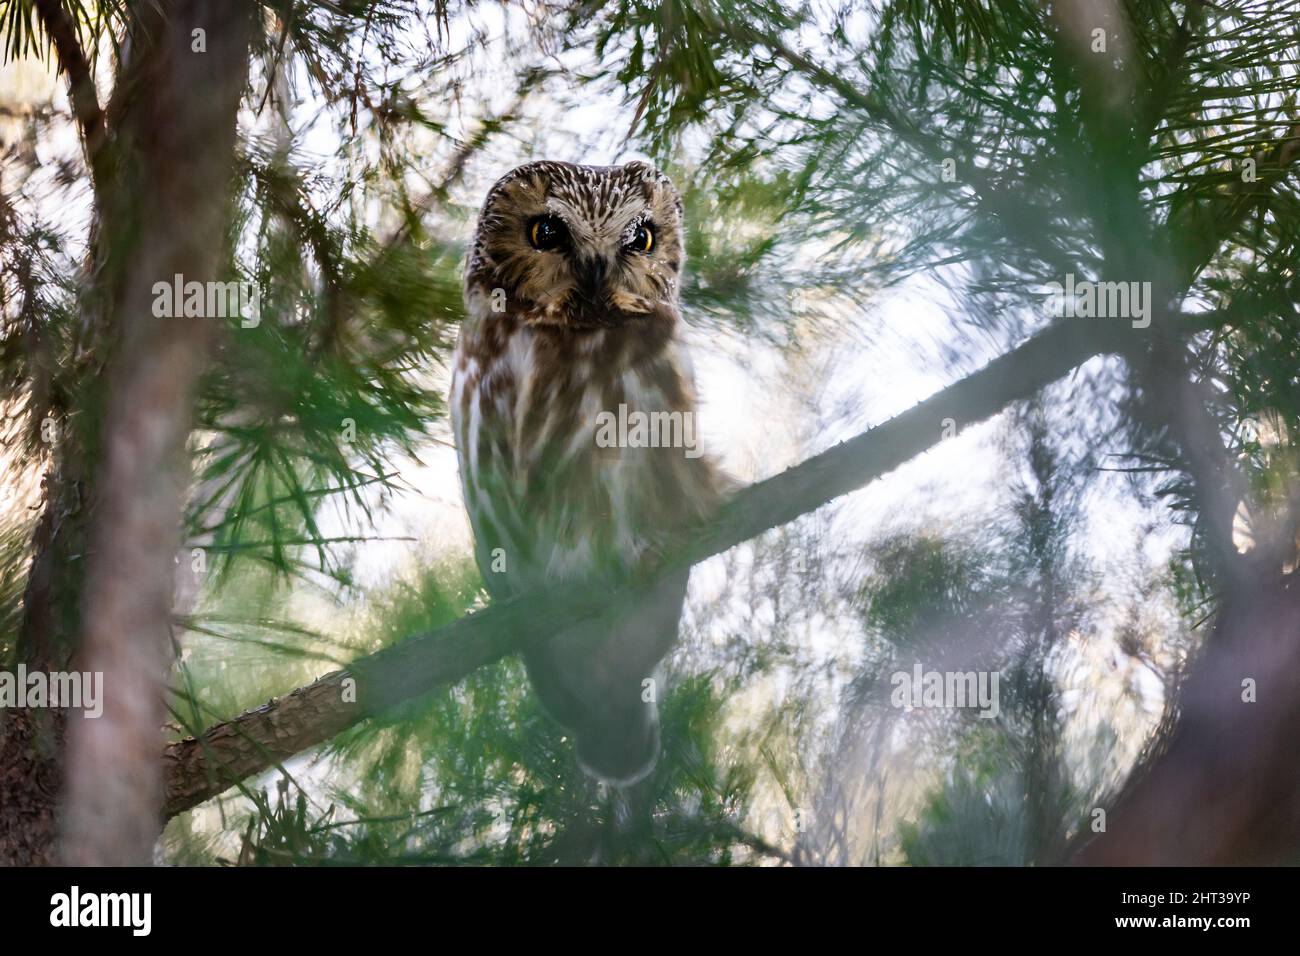 A closeup of an owl standing on a tree branch with an attentive glance Stock Photo